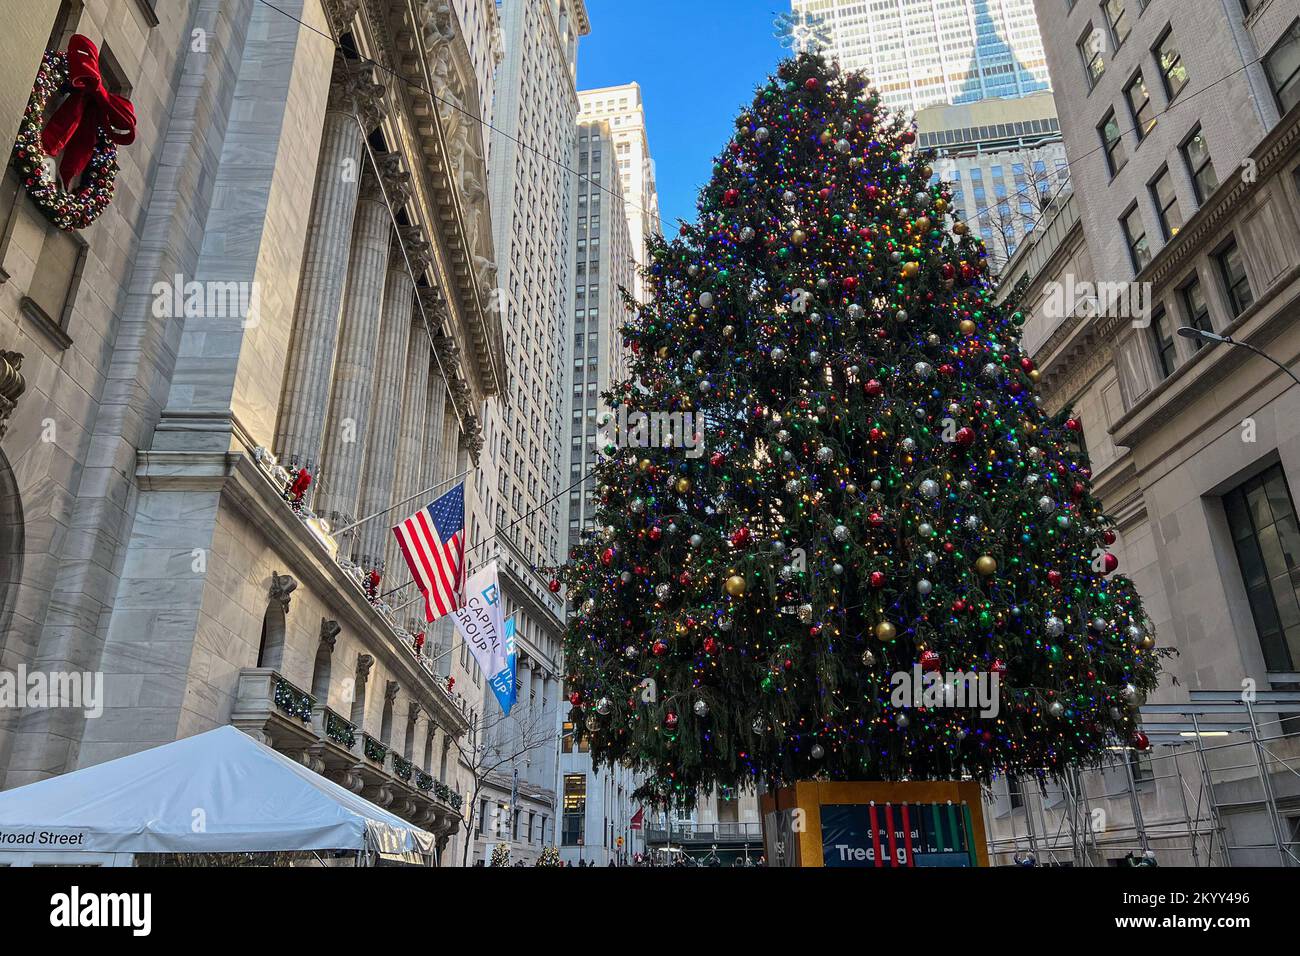 New York, United States. 01st Dec, 2022. A Christmas tree and a Kwanzaa Kinara stand in front of the New York Stock Exchange (NYSE) in New York's Financial District on Dec. 1, 2022. A Kinara is a seven-branched candleholder used in Kwanzaa celebrations in the United States. The NYSE is located at the corner of Wall Street and Broad Street in lower Manhattan. (Photo by Samuel Rigelhaupt/Sipa USA) Credit: Sipa USA/Alamy Live News Stock Photo